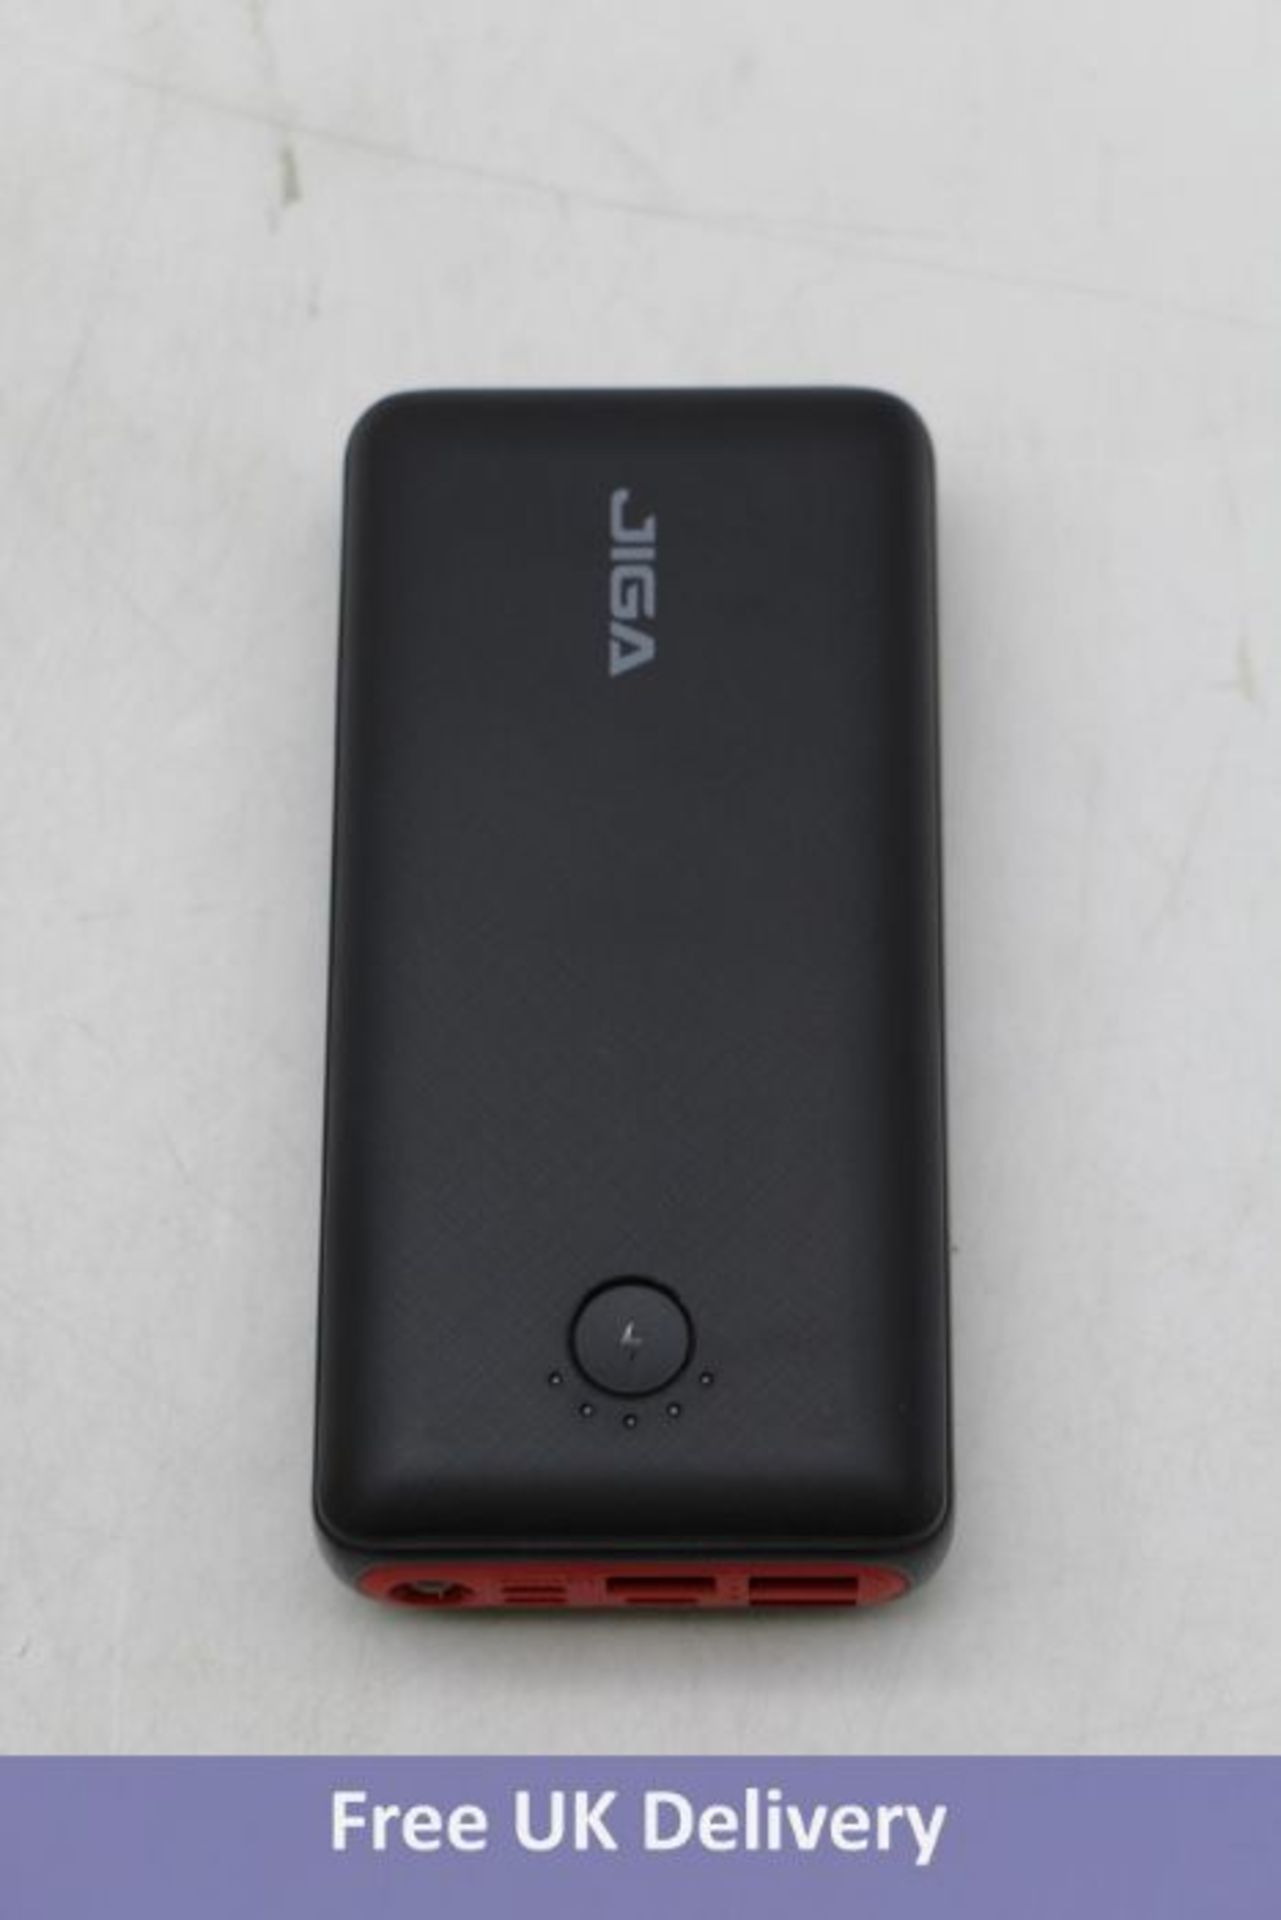 Six JIGA Power Banks, 30000mAh Portable Chargers with 3 Outputs/3 Inputs